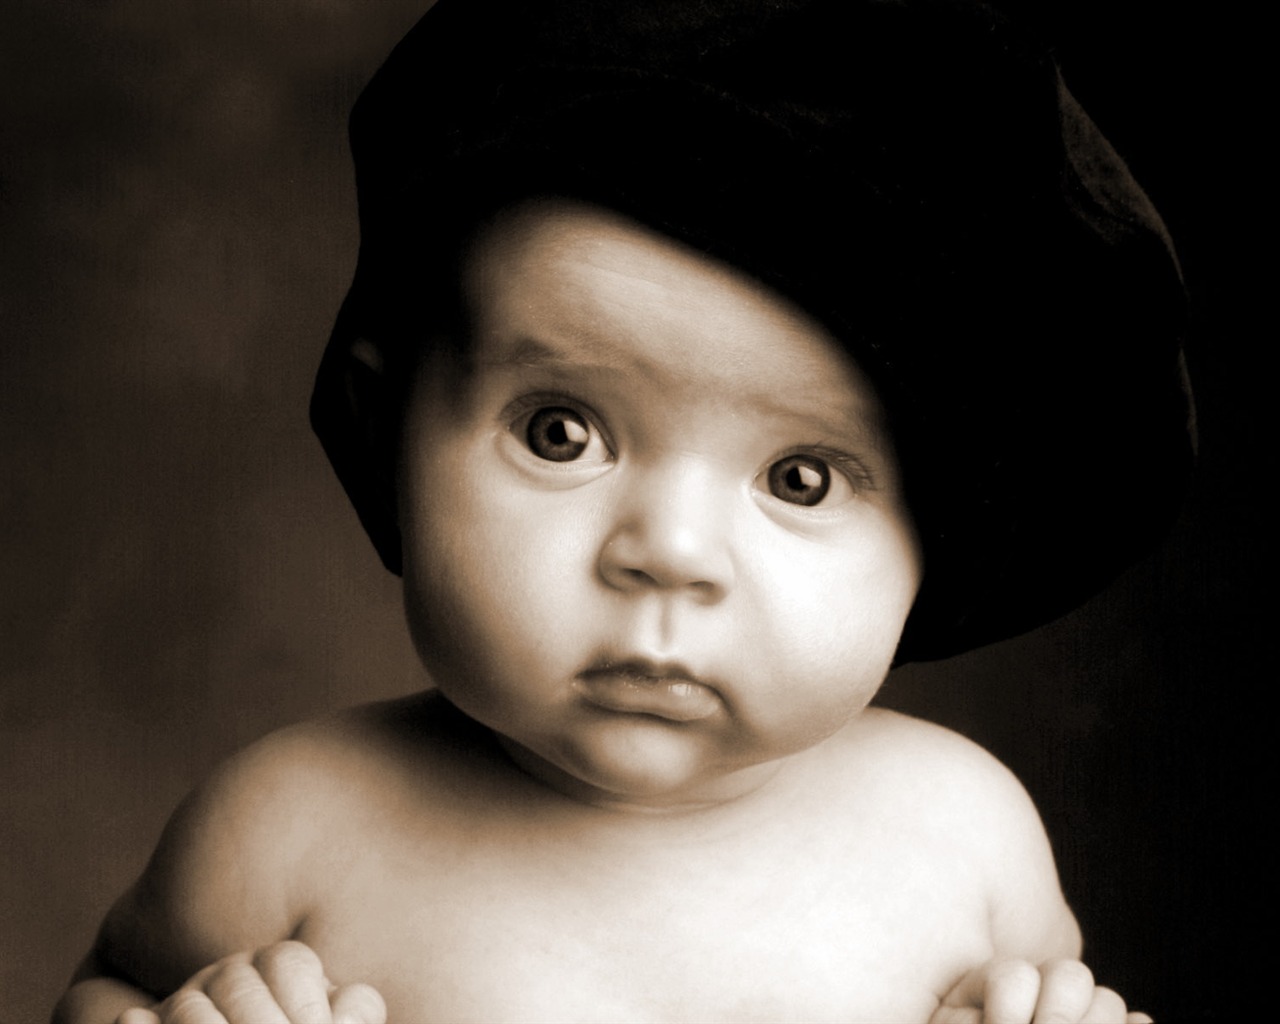 Cute Baby Wallpapers (2) #4 - 1280x1024